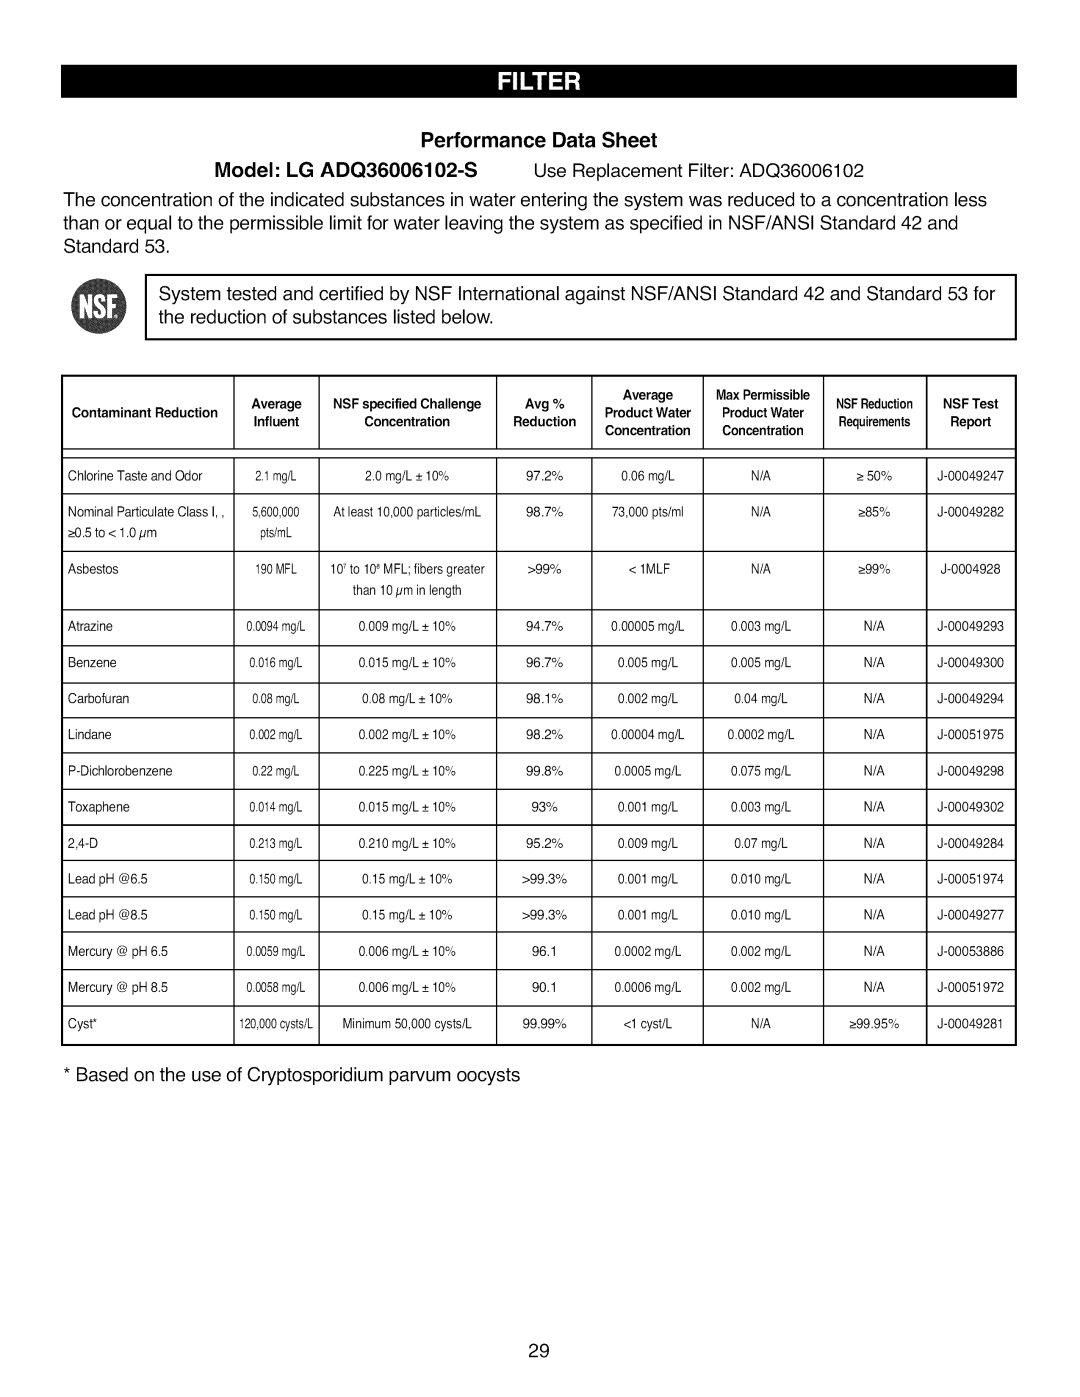 Kenmore 795.7105 manual Performance Data Sheet, Model: LG ADQ36006102-S, Use Replacement Filter: ADQ36006102 